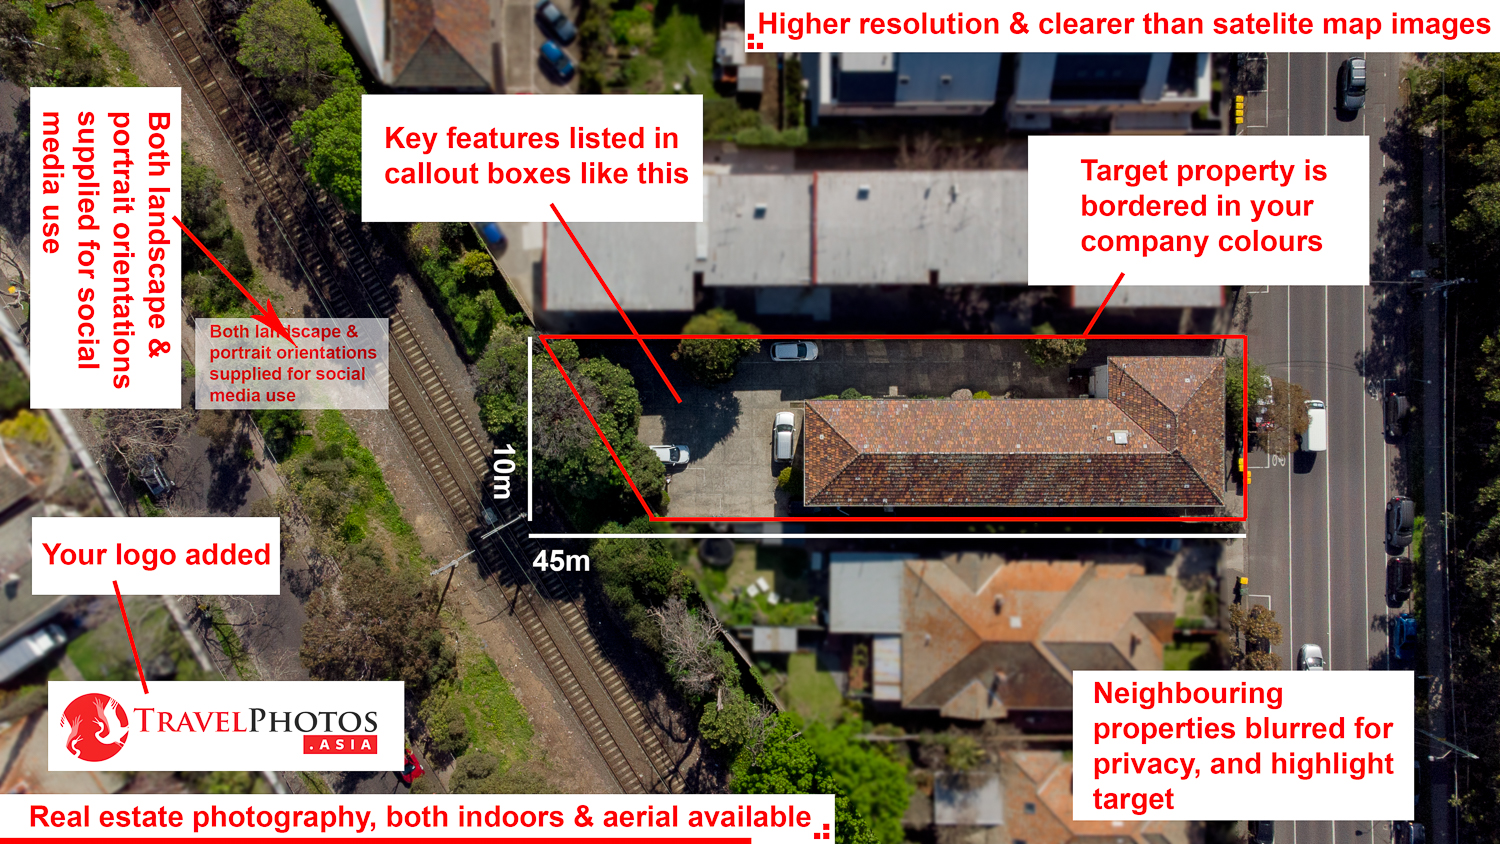 A real estate property information image. Photo taken from drone.